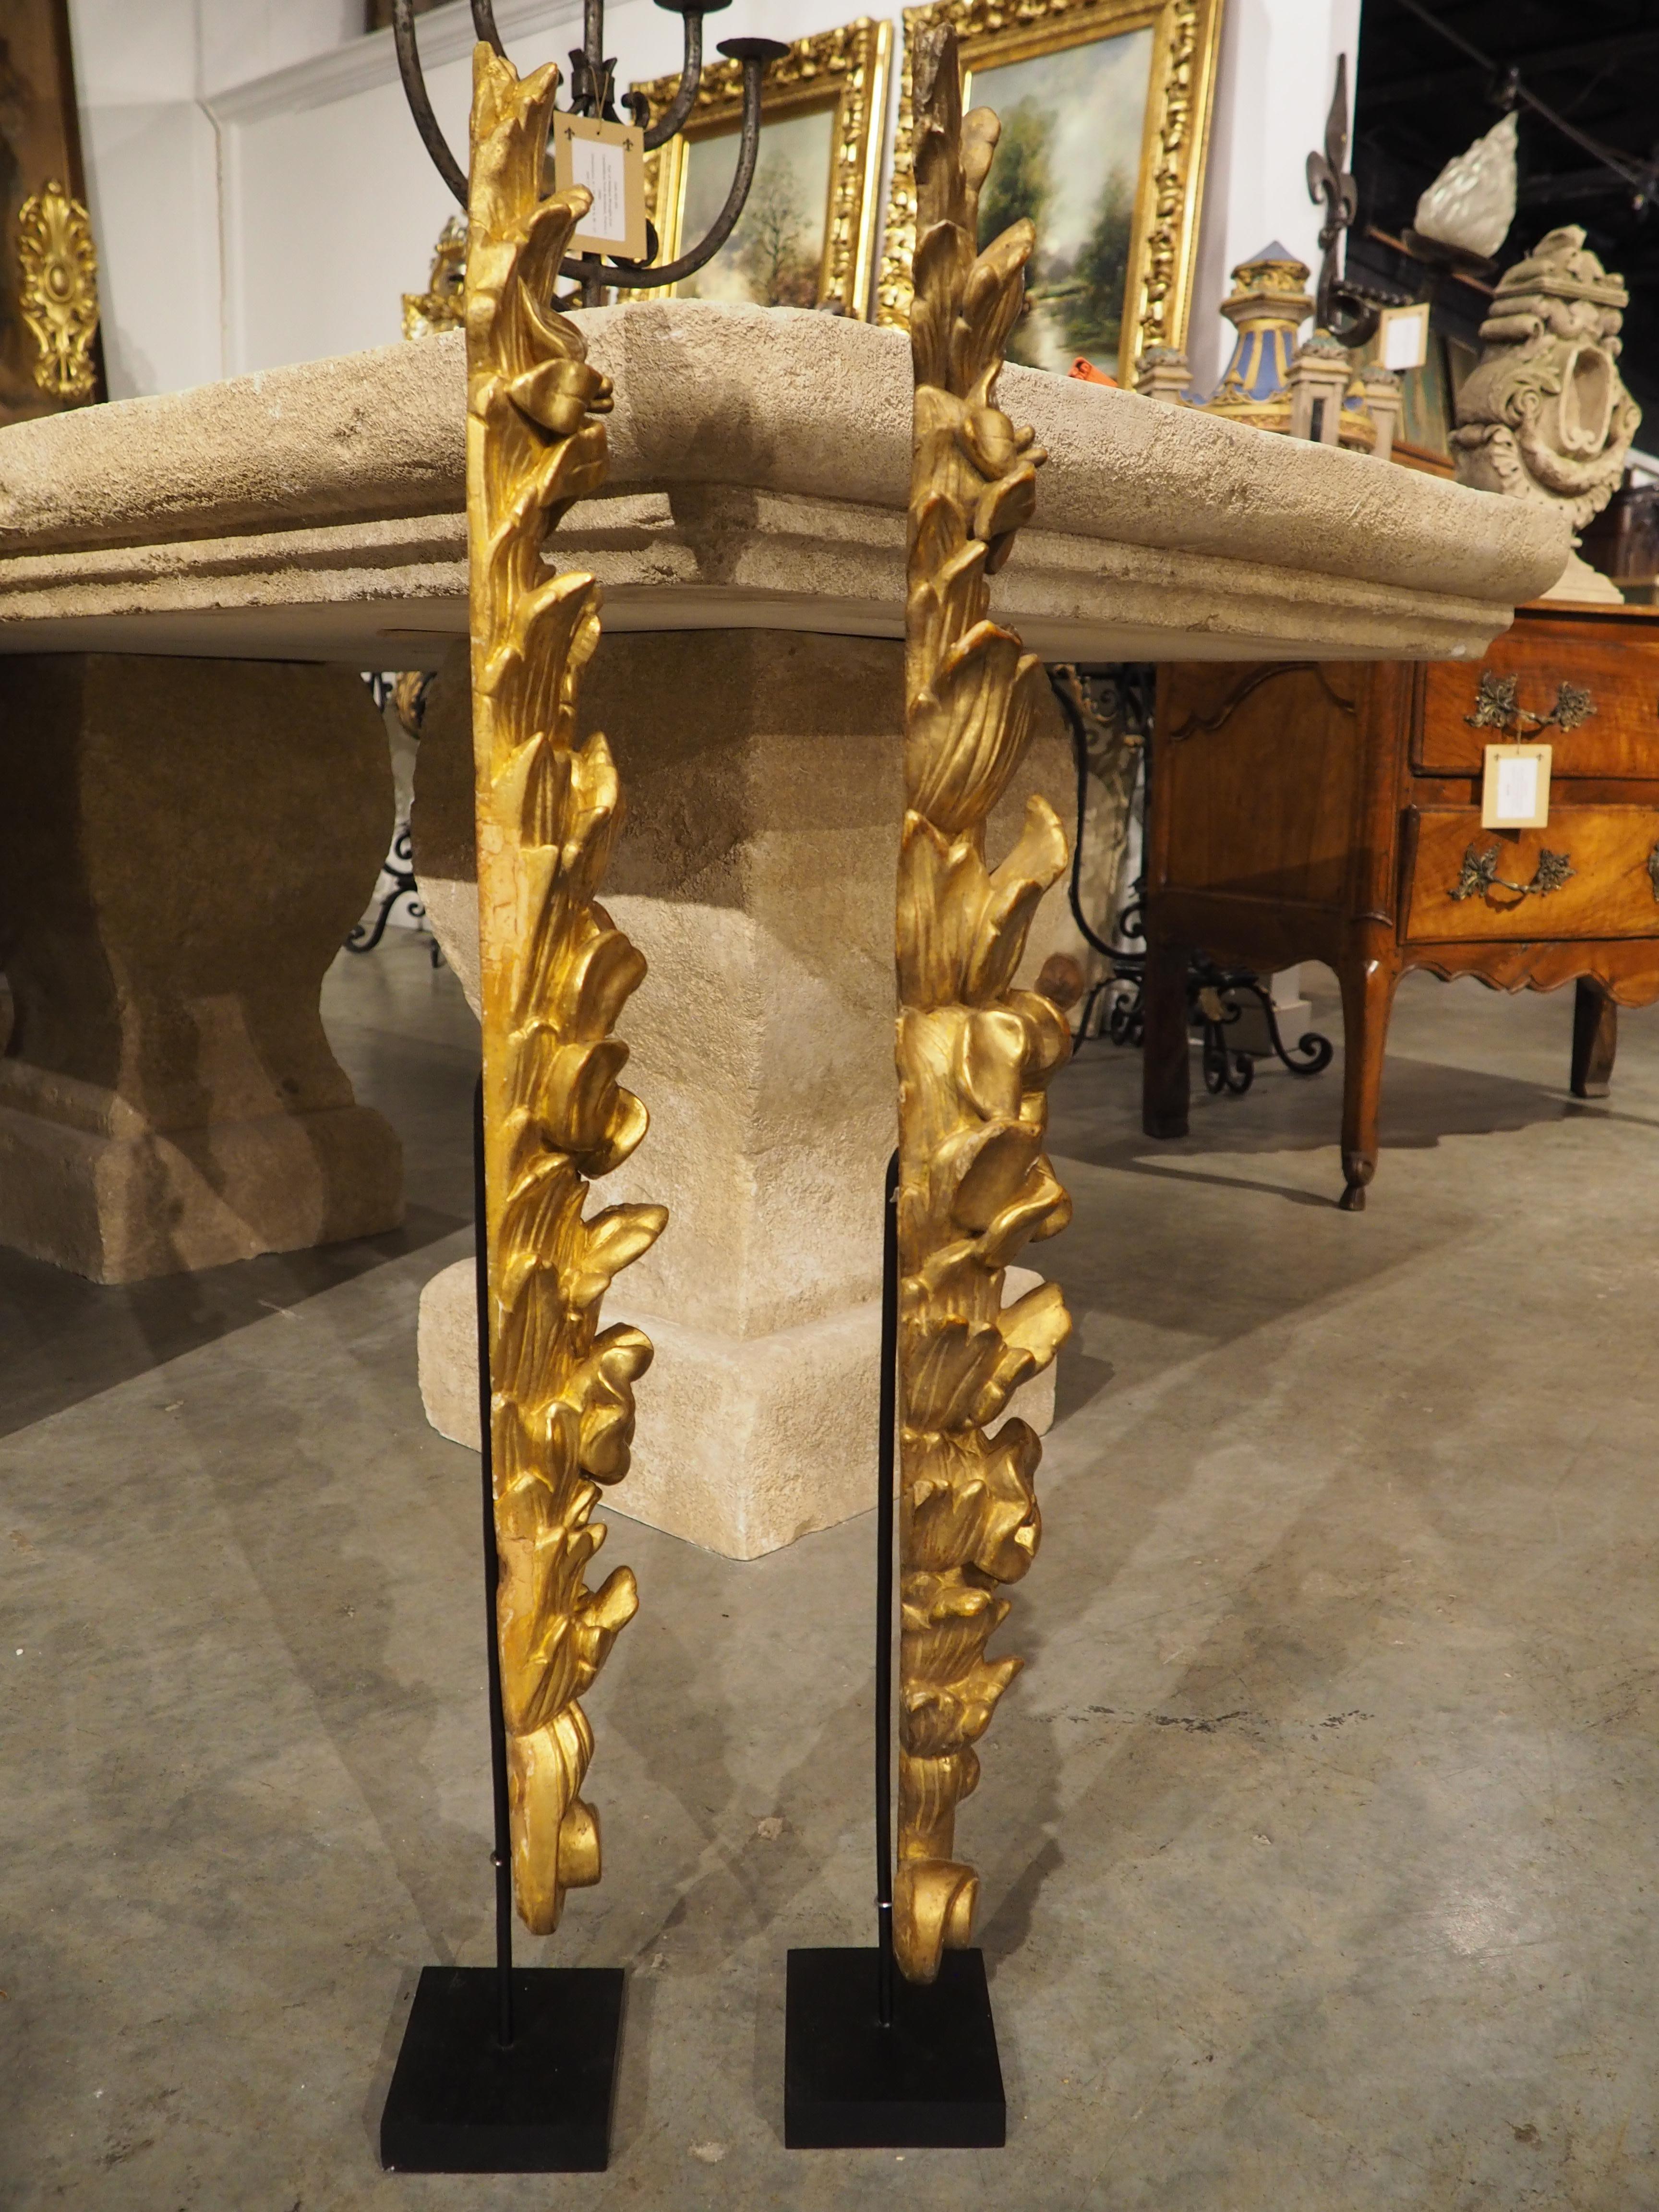 Italian Pair of 18th Century Giltwood Altar Ornaments from Italy (34 inches tall)